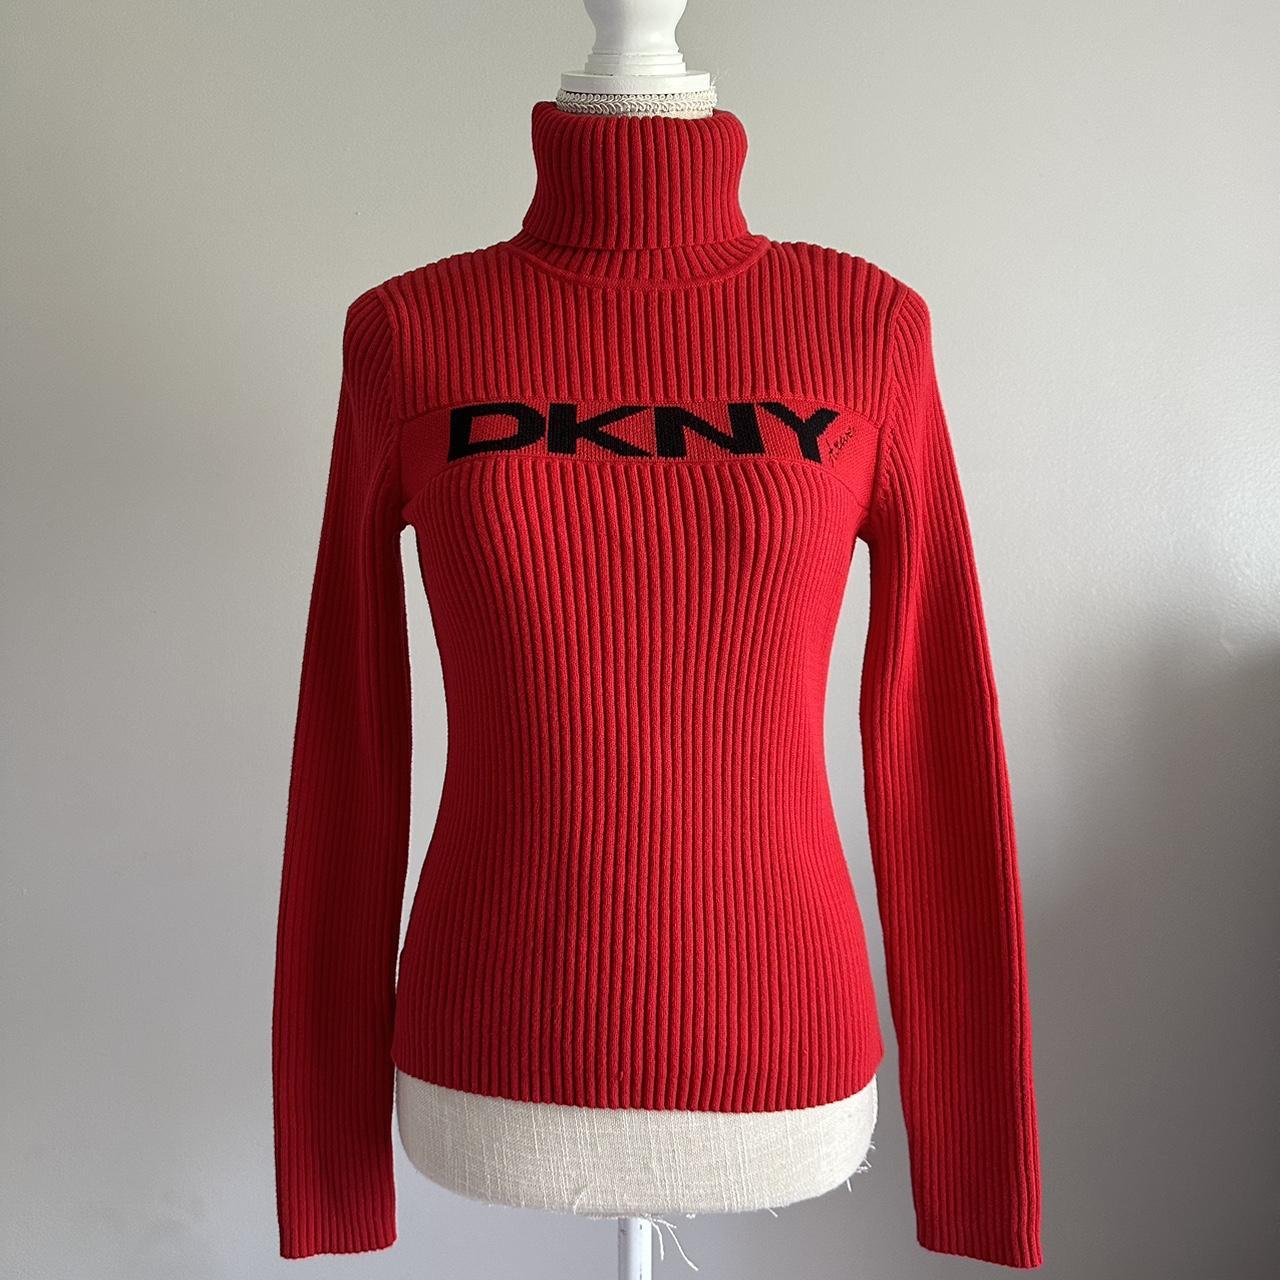 DKNY Women's Red and Black Jumper